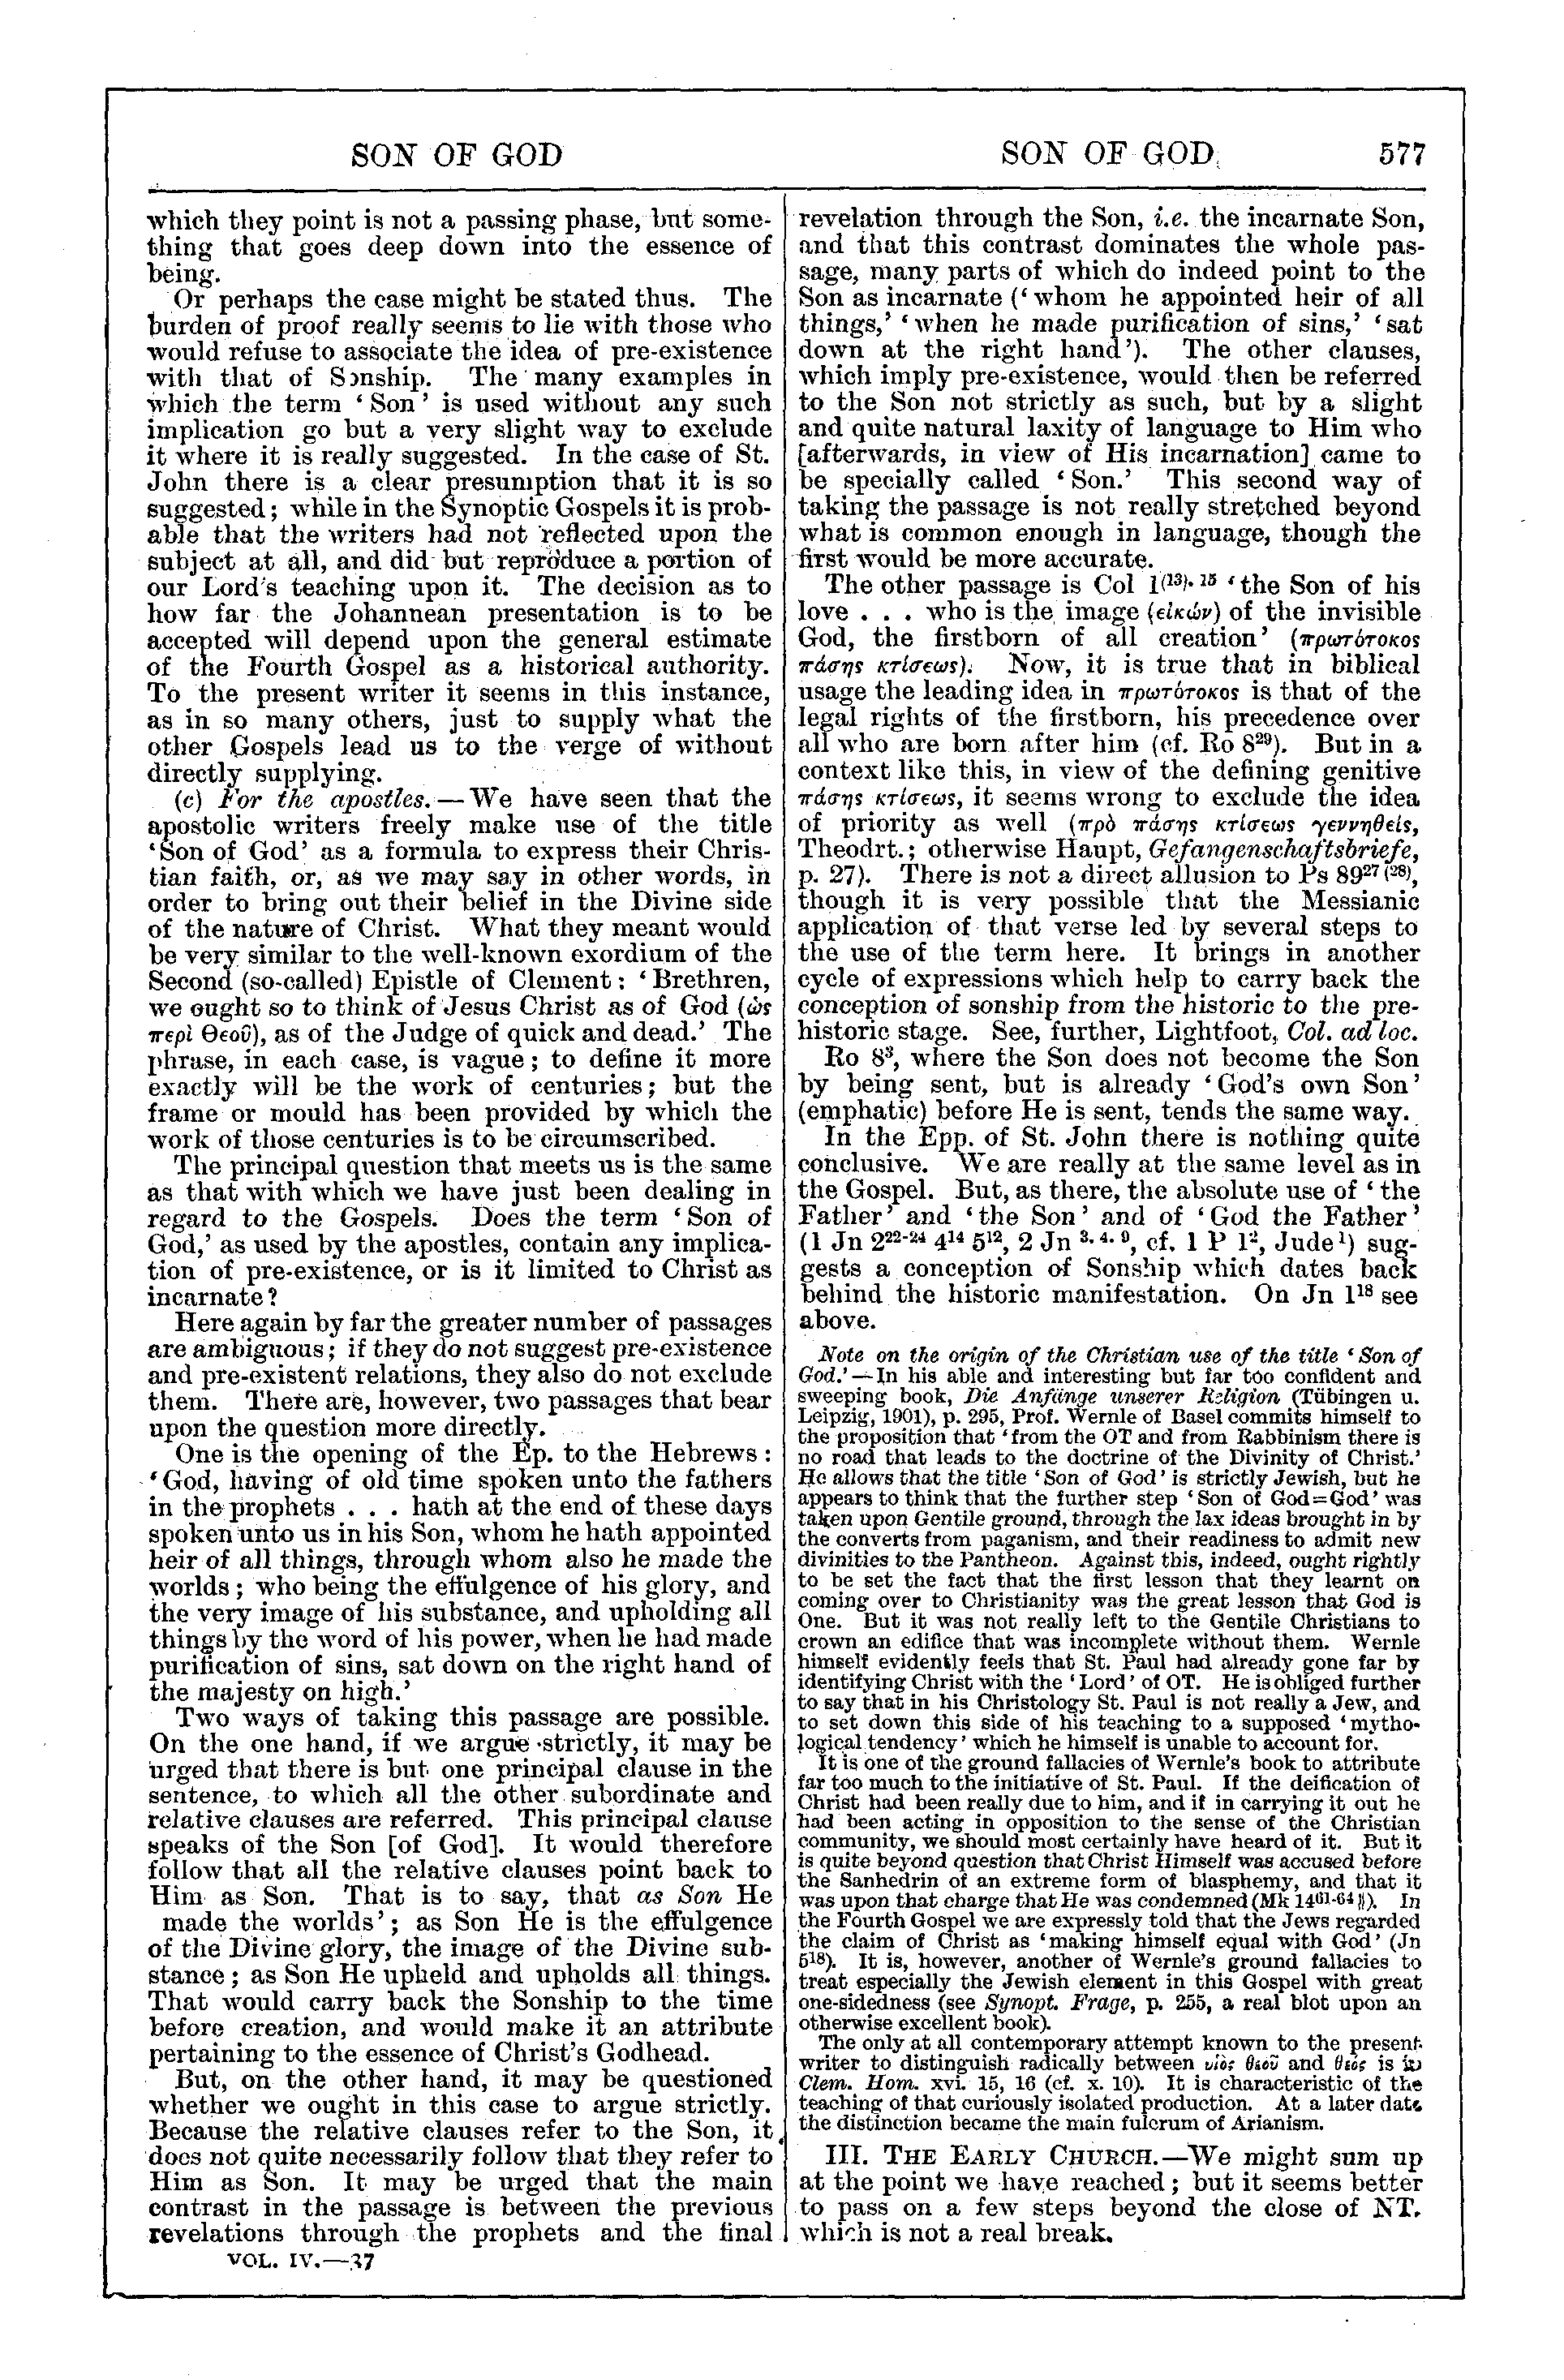 Image of page 577